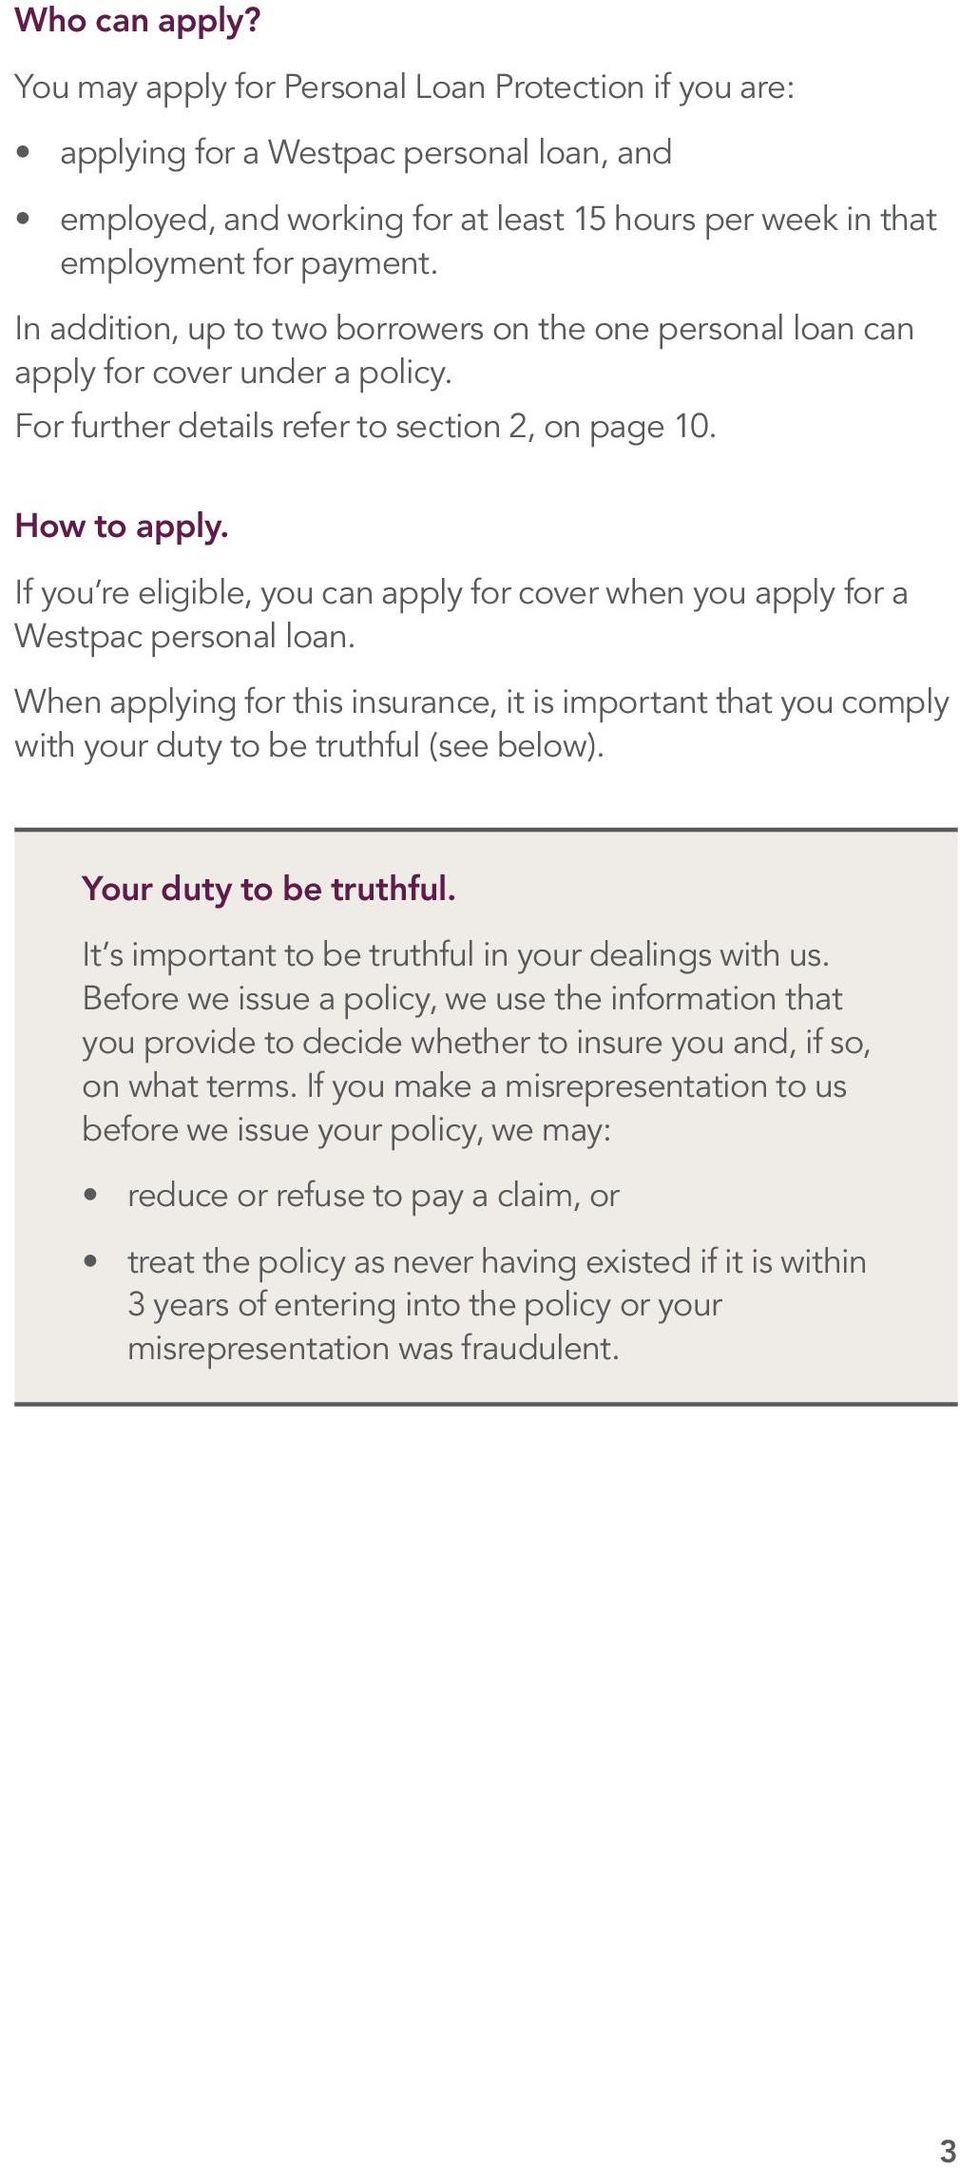 If you re eligible, you can apply for cover when you apply for a Westpac personal loan. When applying for this insurance, it is important that you comply with your duty to be truthful (see below).